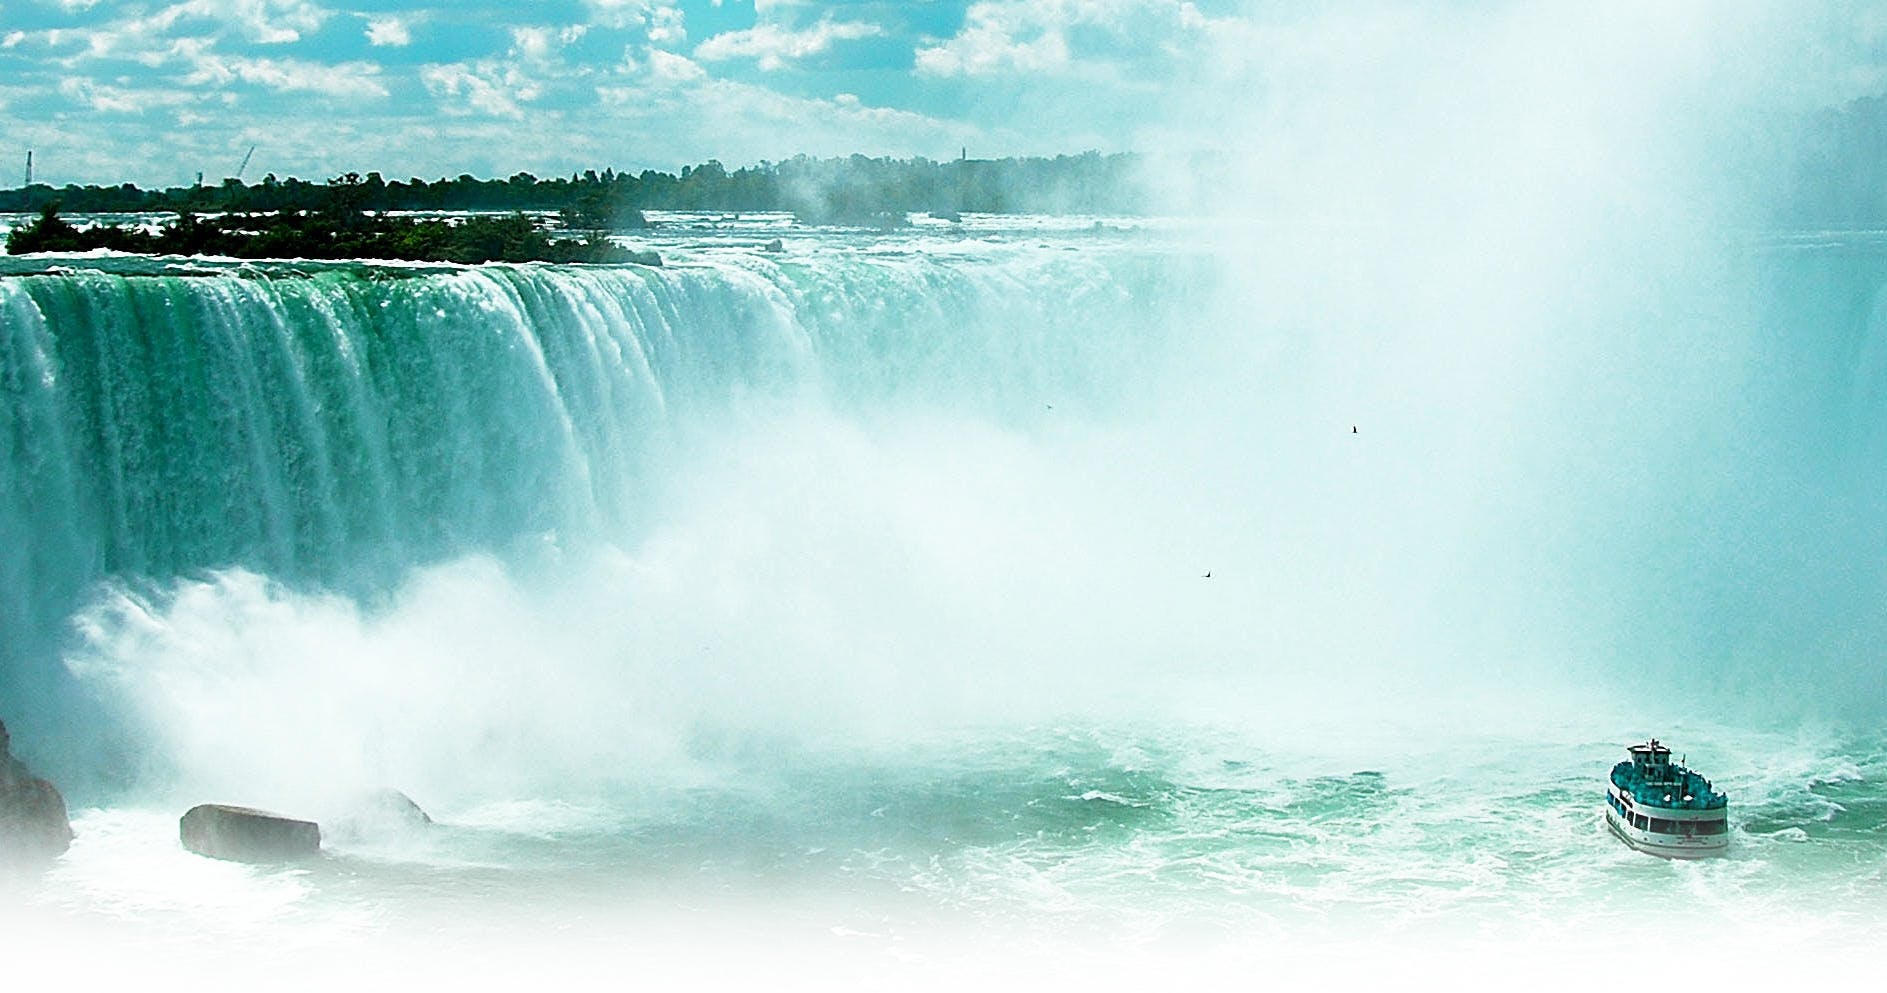 Niagara Falls tour with boat ride and lunch from Toronto